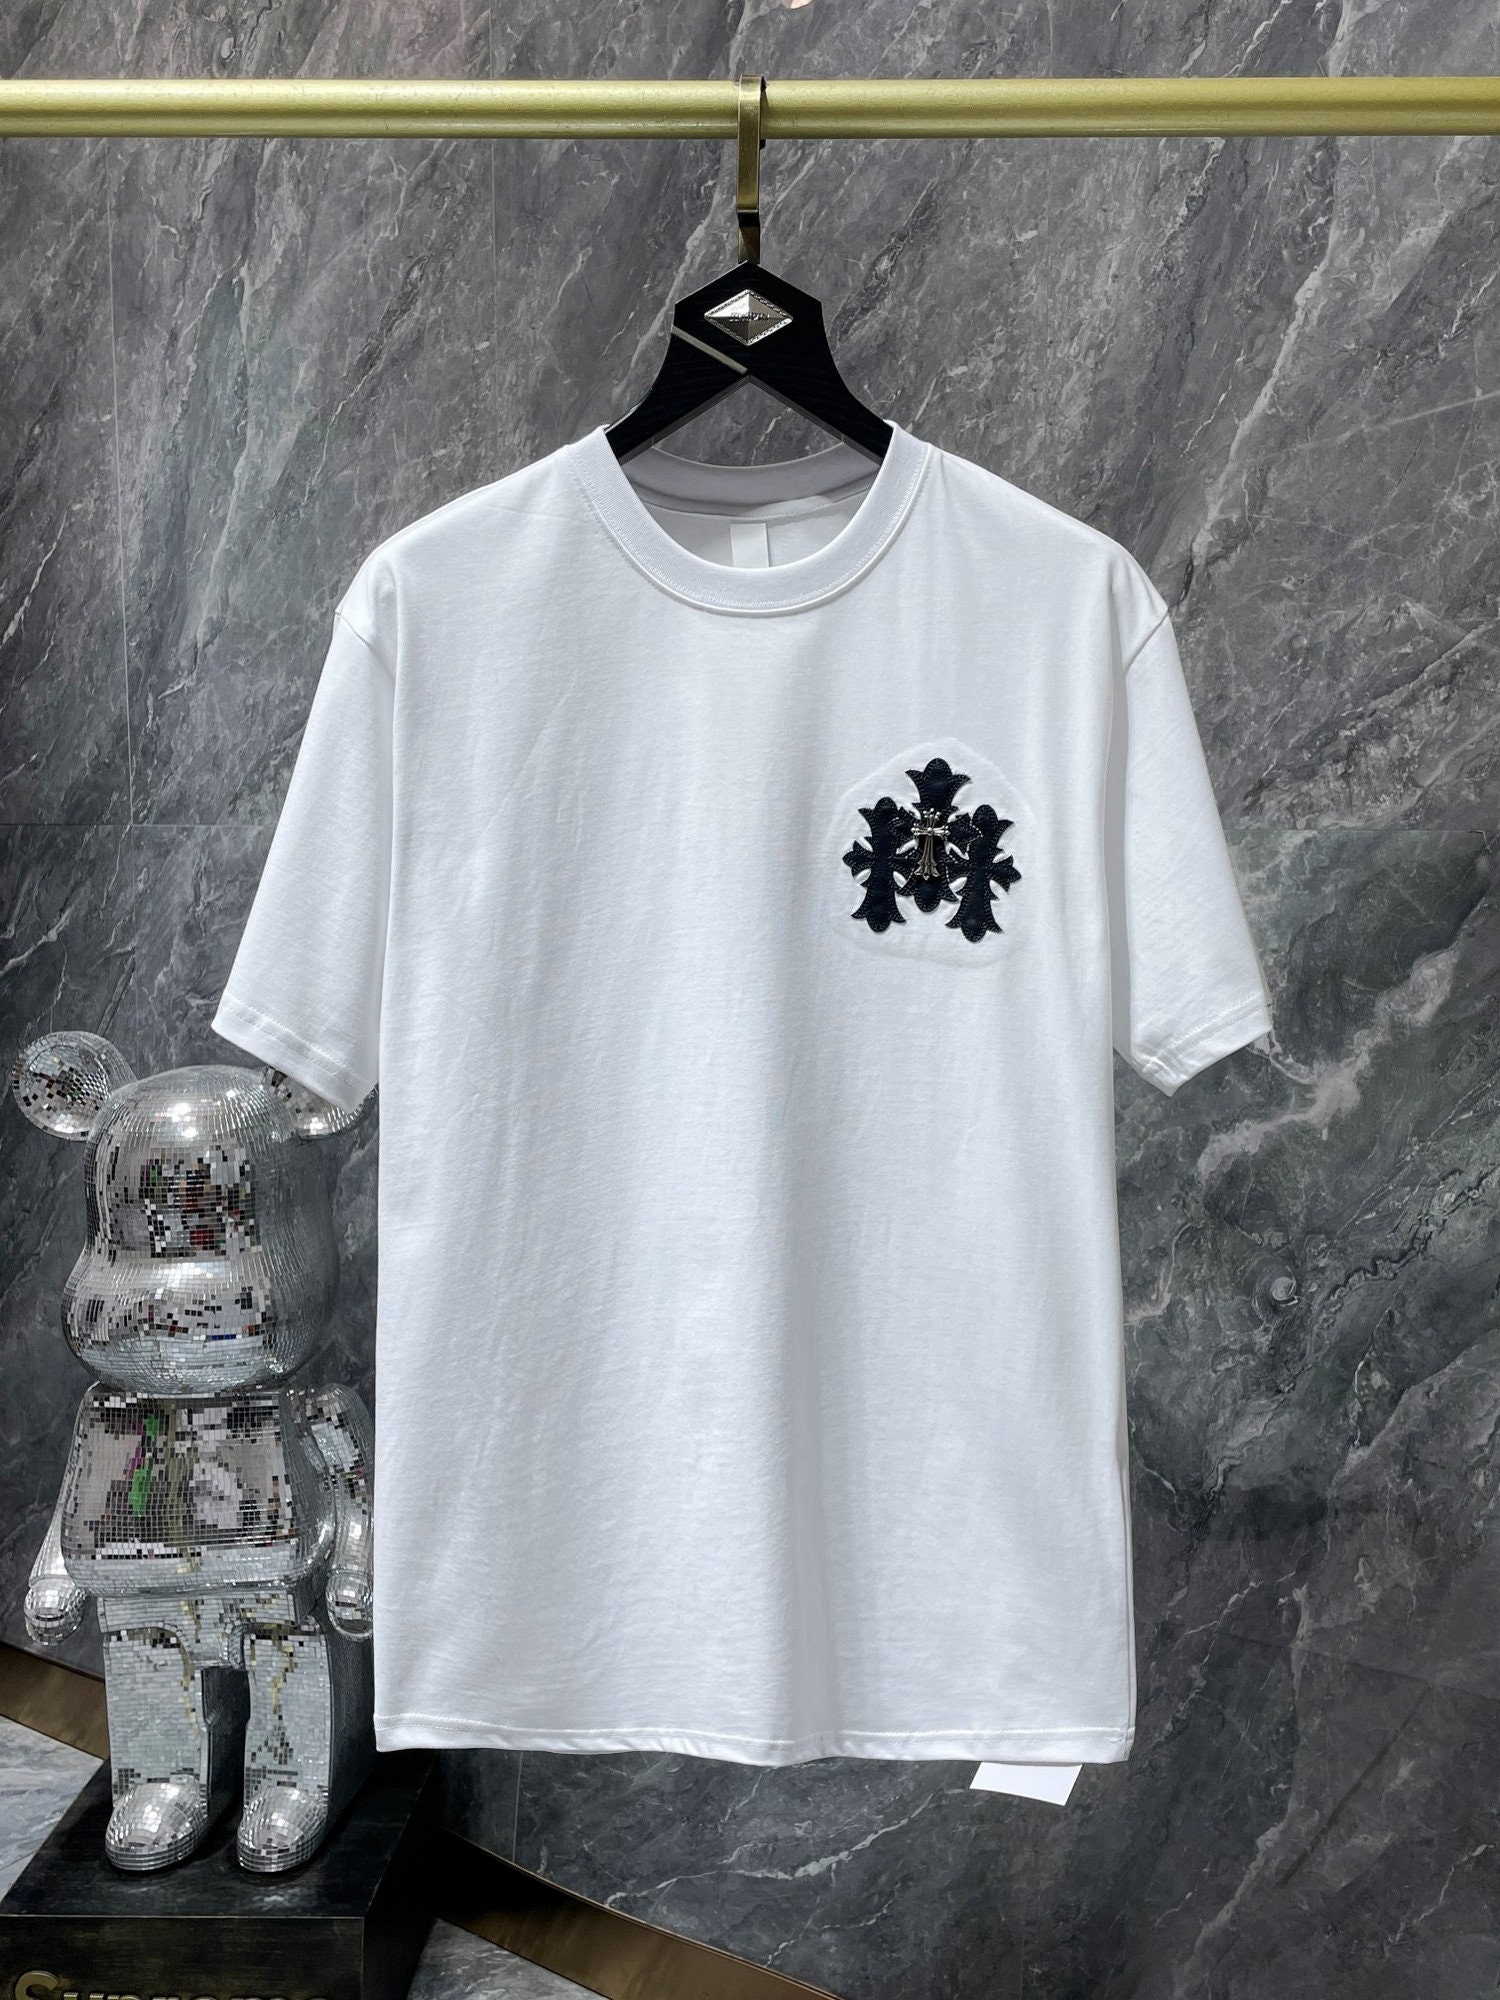 Chrome Hearts Vibes Y2K Aesthetic Graphic Tee Chrome Hearts - Etsy